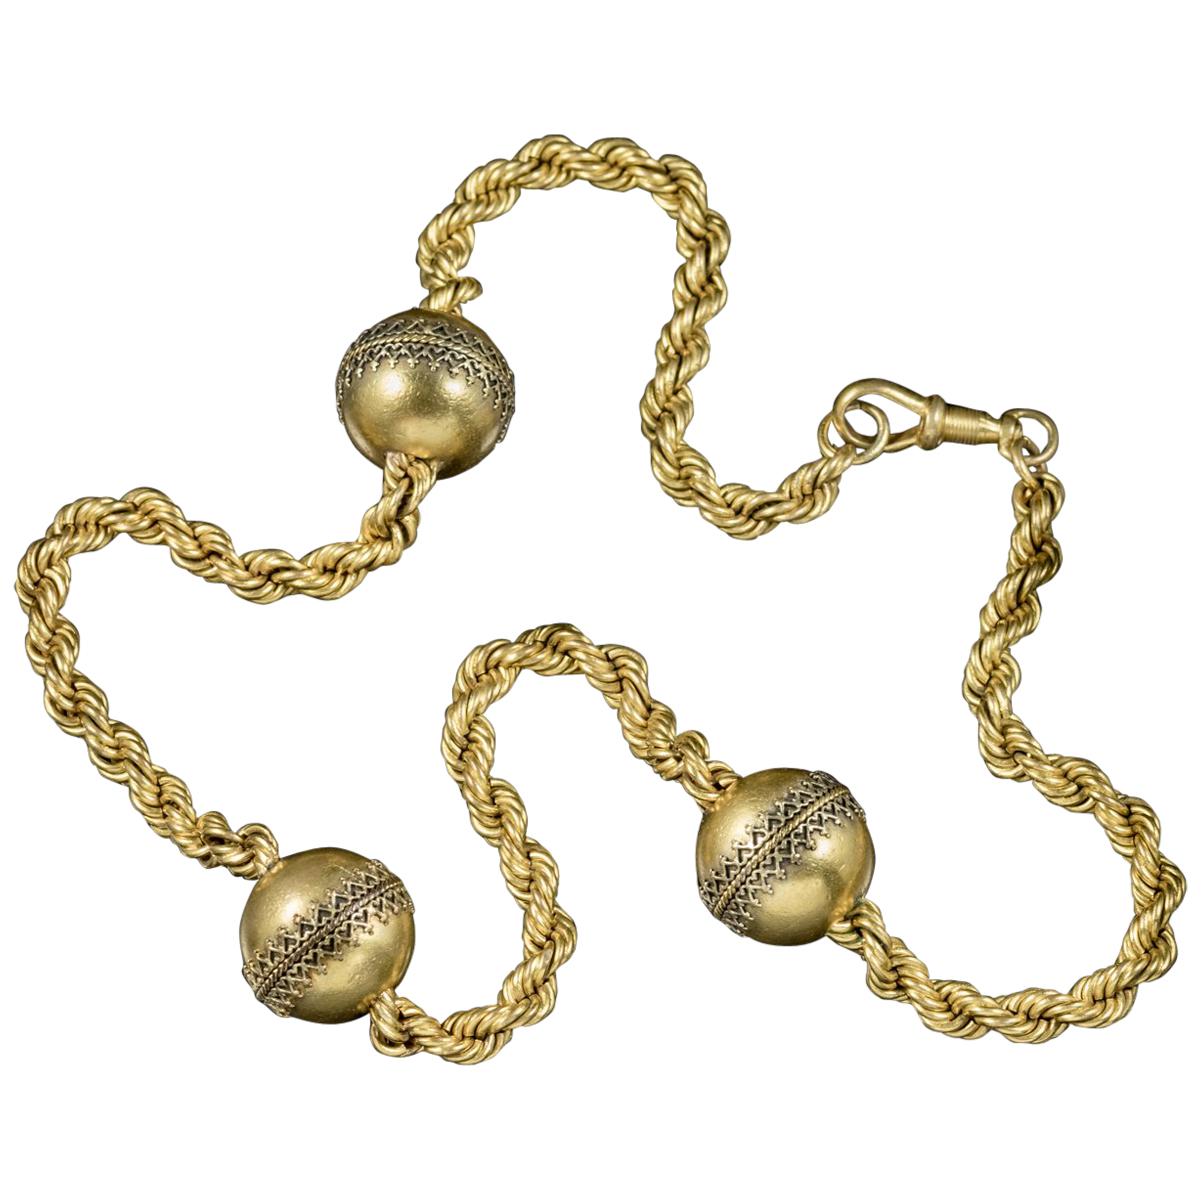 Antique Victorian Cannetille Ball Necklace 18ct Gilded Gold Chain, circa 1860